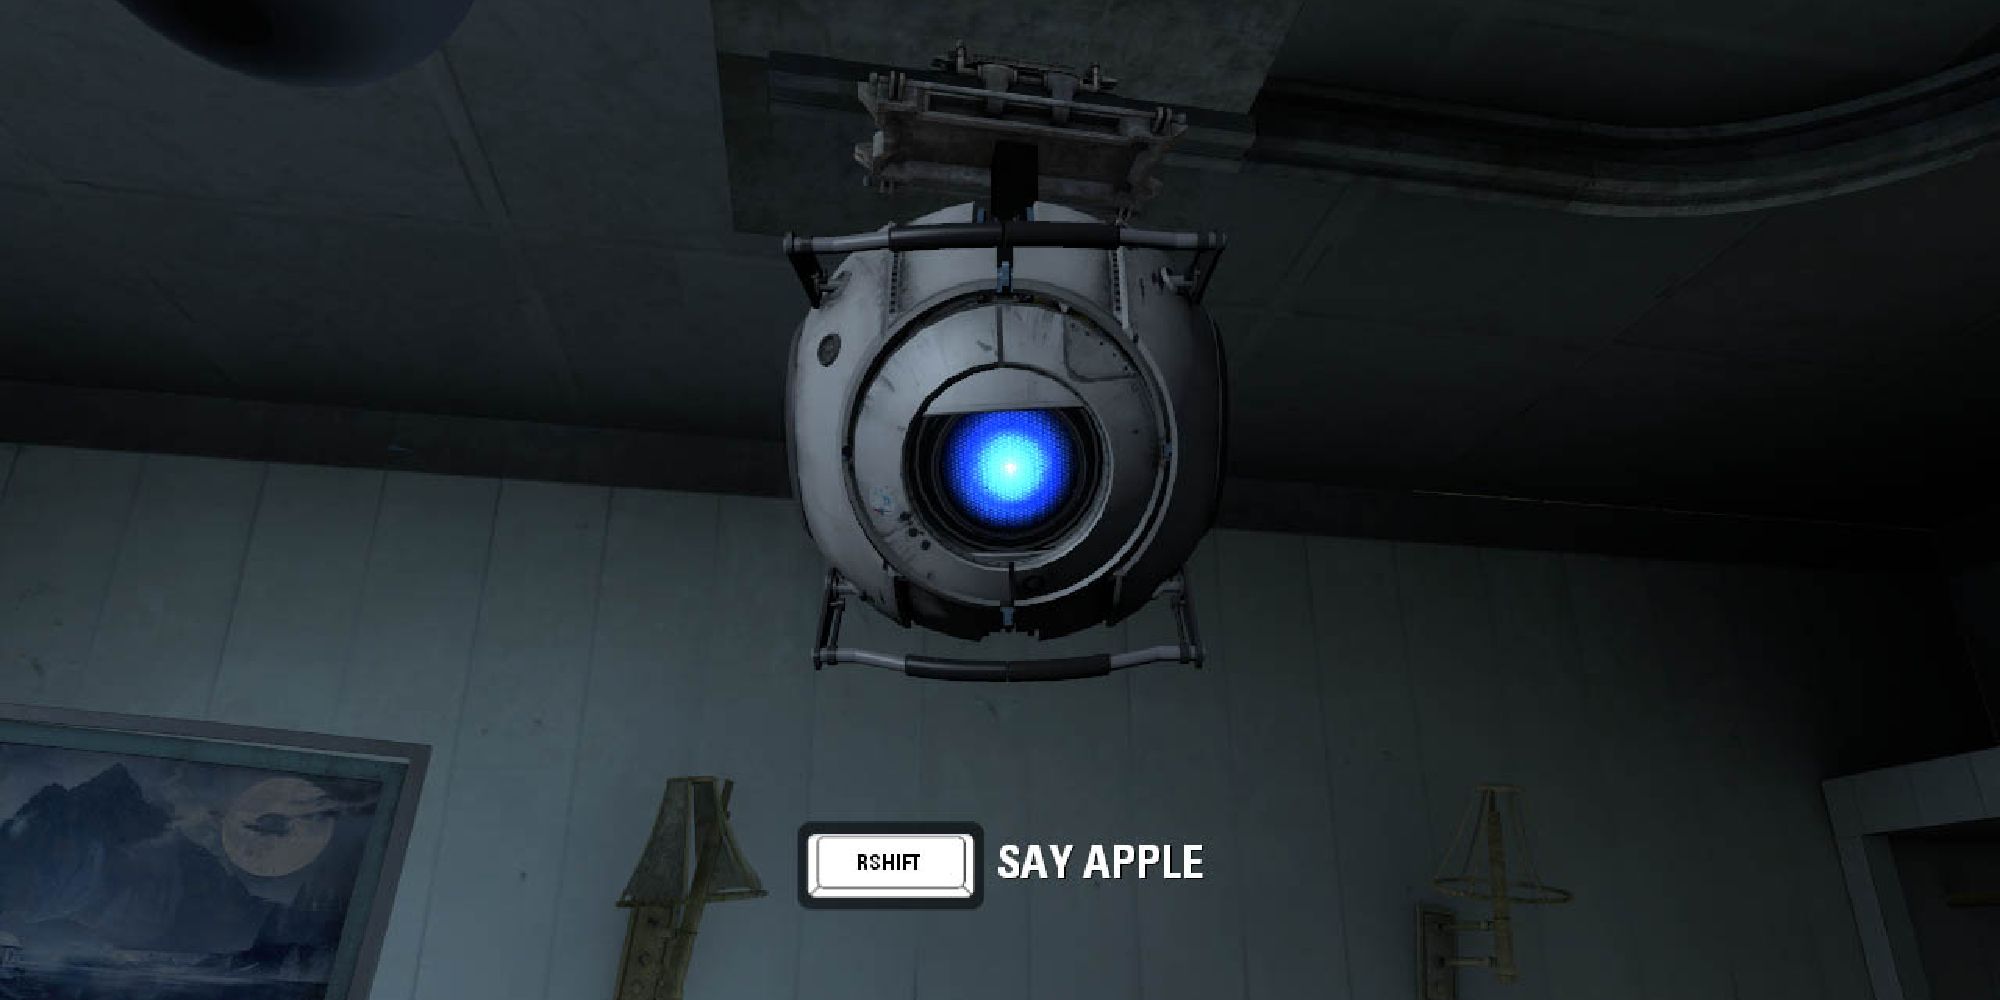 Wheatley instructs the player character to press a button to say "apple" in Portal 2's tutorial